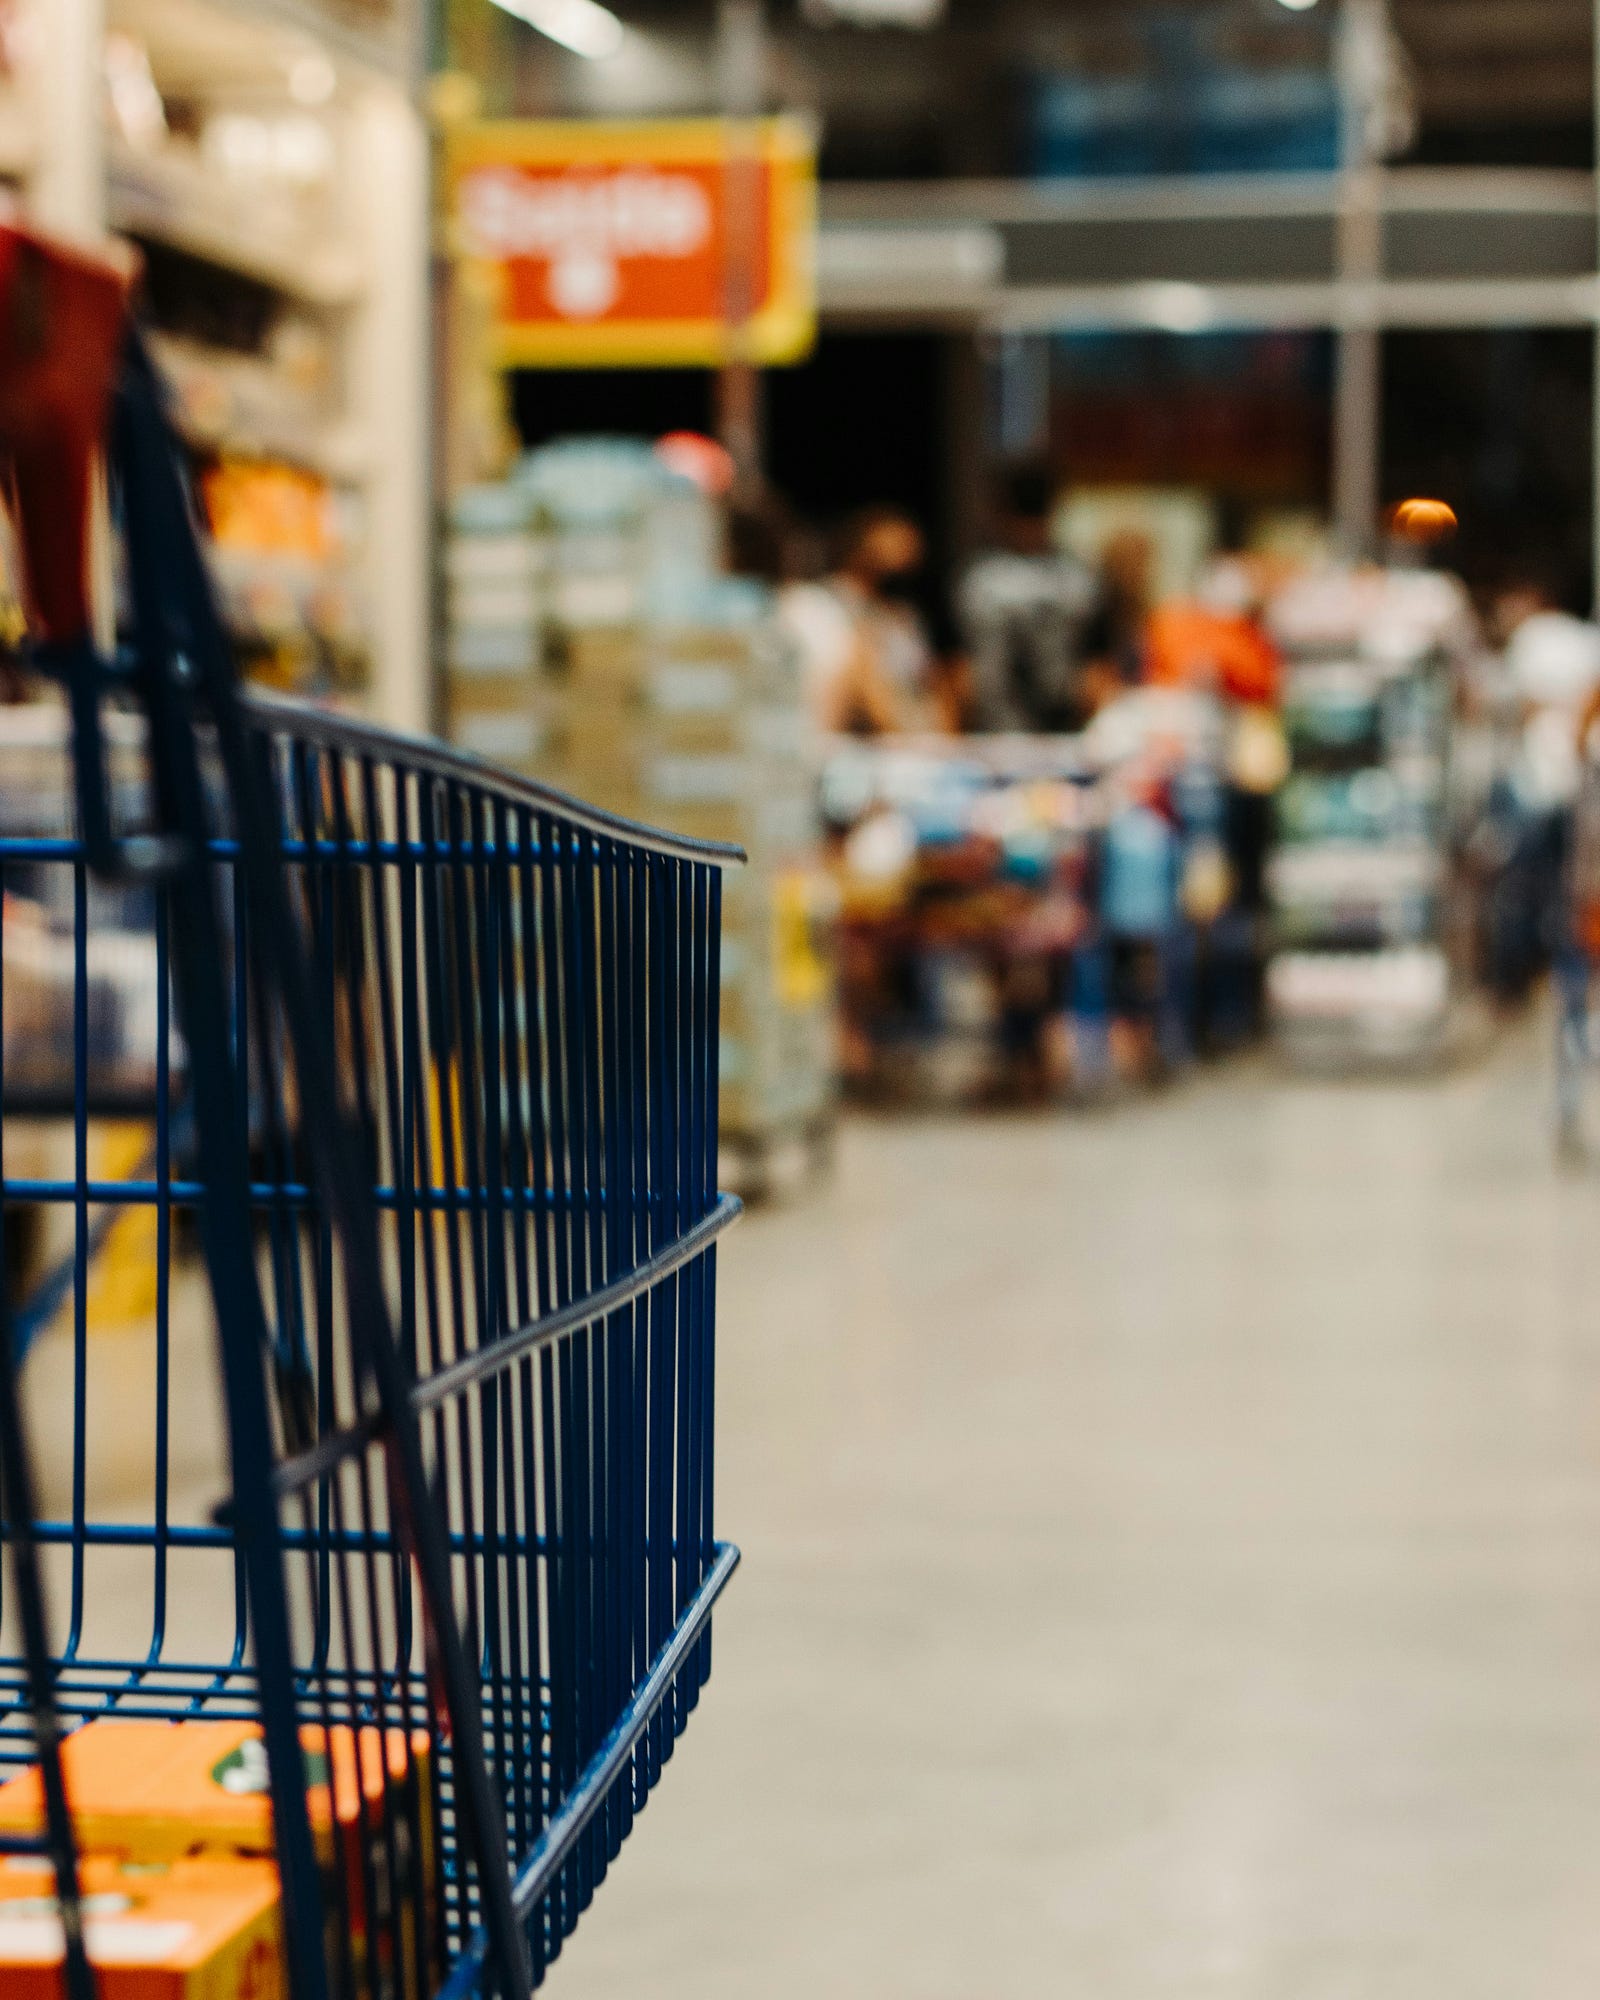 A black shopping cart is in the left foreground. In the background are blurred grocery products. According to a 2012 study published in the International Journal of Food Protection Trends, shopping cart handles are hotspots for various bacteria, including potential nasties like E. coli and Salmonella.